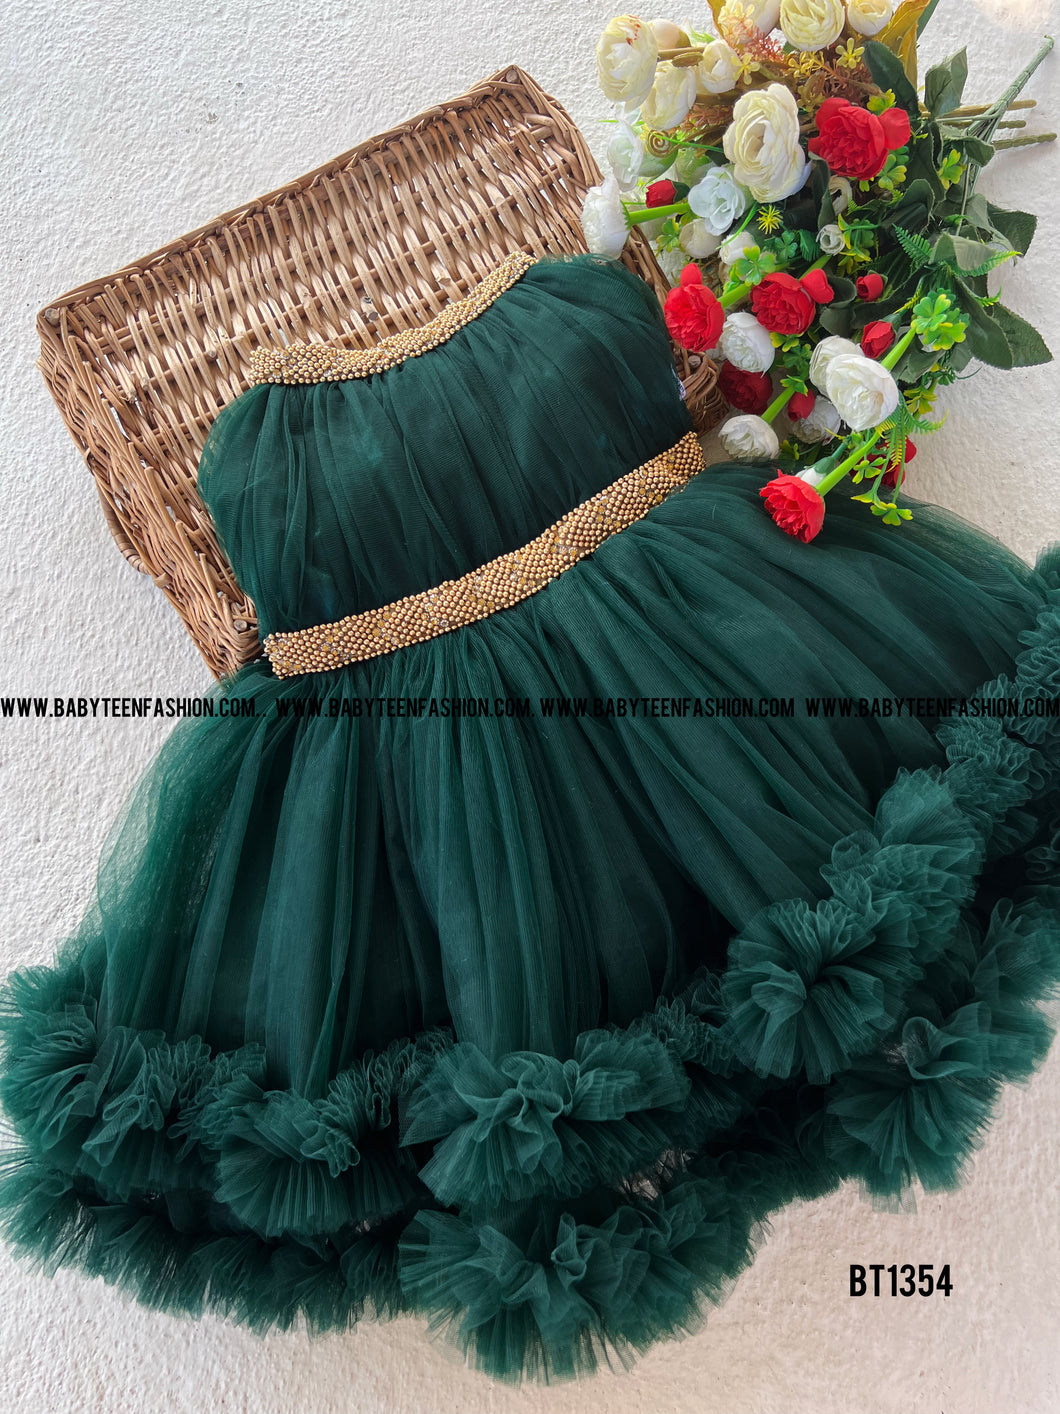 BT1354 Emerald Elegance Festive Gown - A Touch of Sophistication for Little Ones